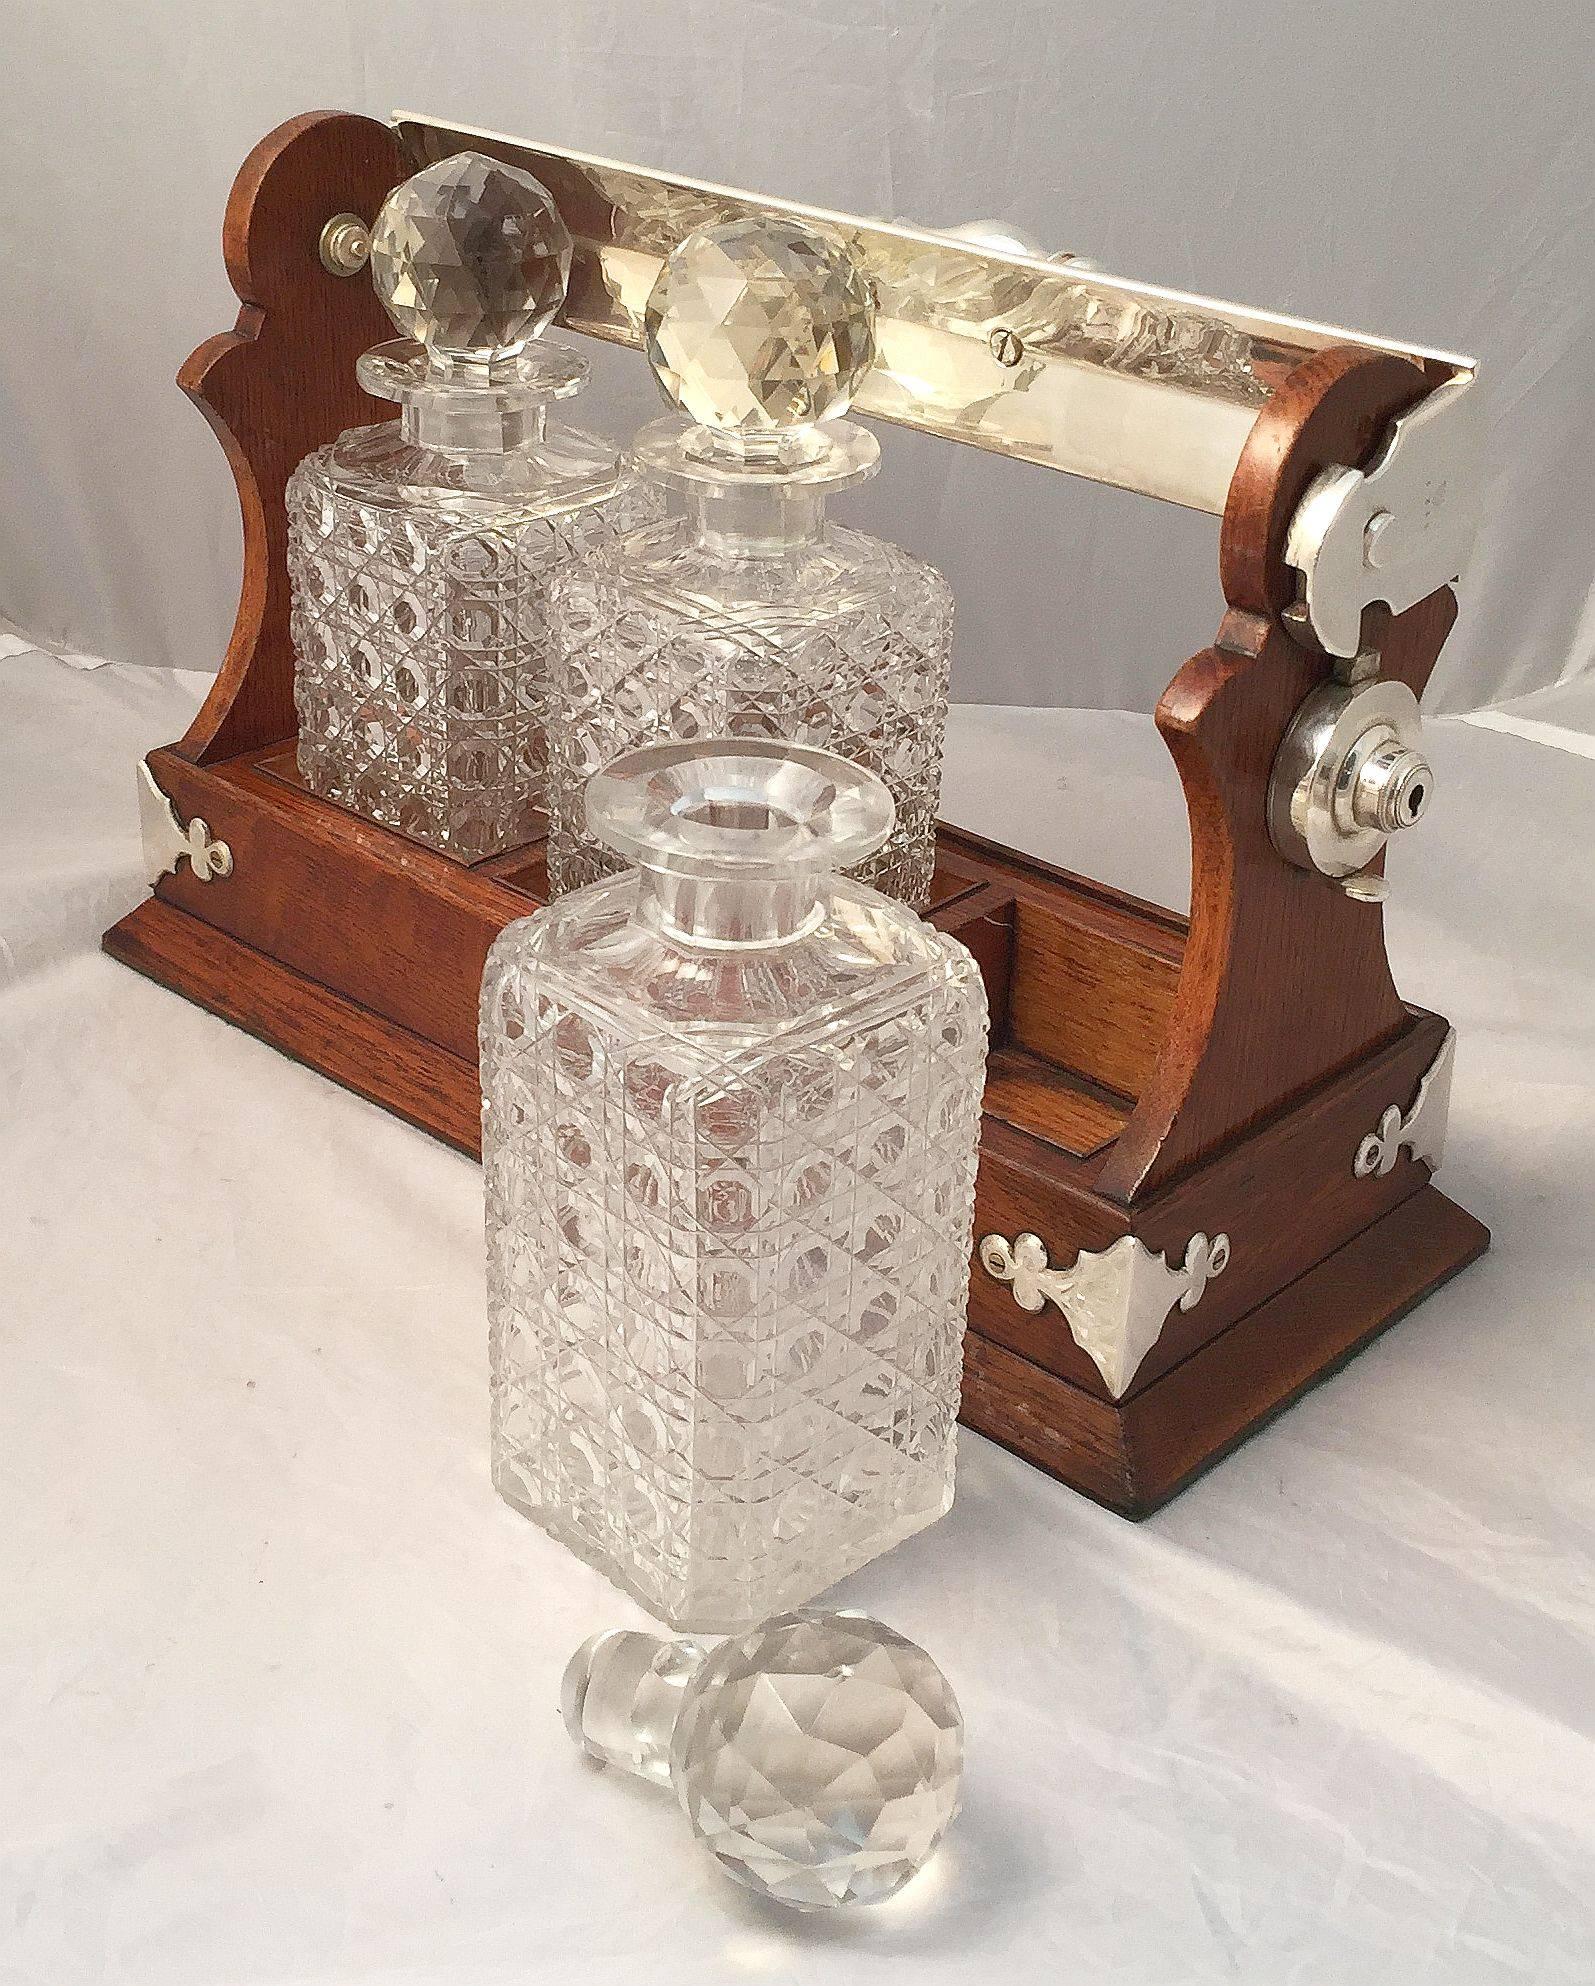 Edwardian English Tantalus or Decanter Set for Spirits of Oak and Silver